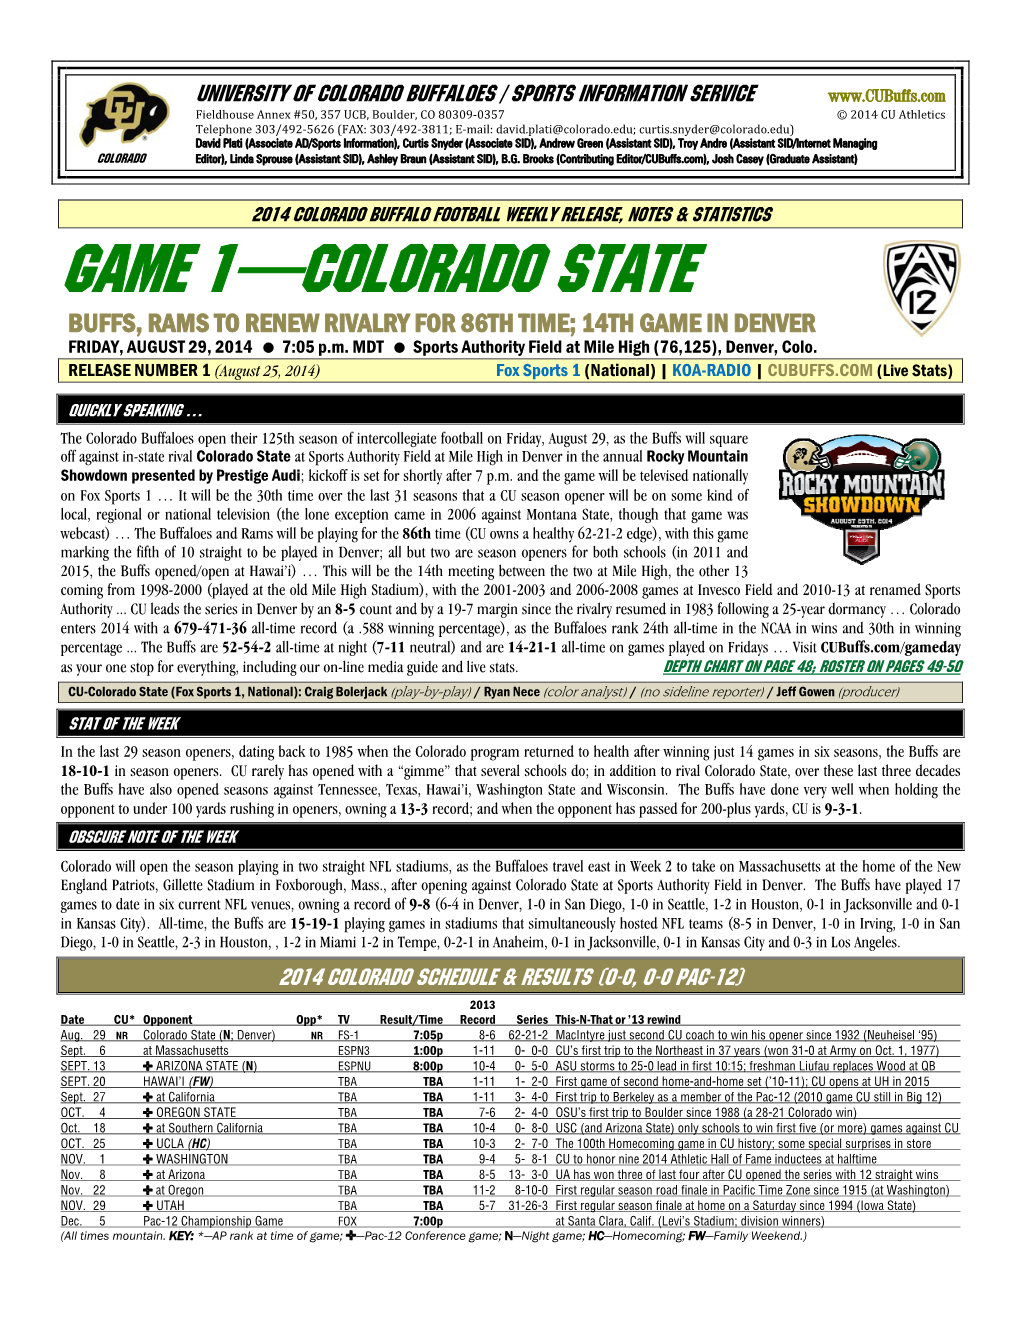 GAME 1—COLORADO STATE BUFFS, RAMS to RENEW RIVALRY for 86TH TIME; 14TH GAME in DENVER FRIDAY, AUGUST 29, 2014 7:05 P.M